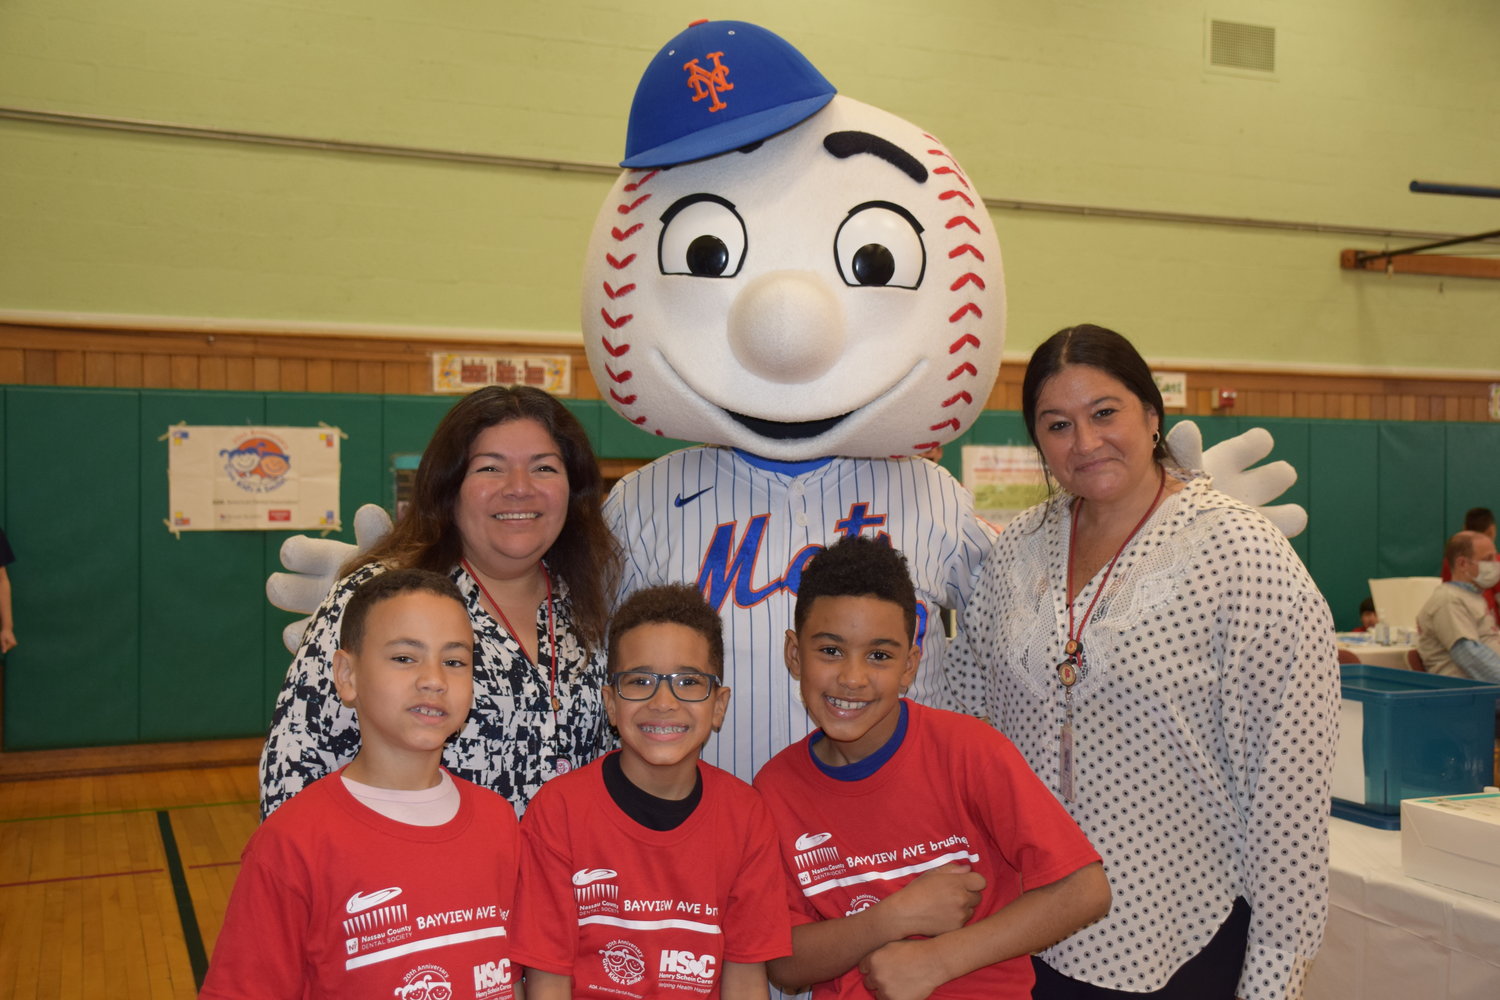 Freeport Public Schools Board of Education President Maria Jordan-Awalom (left), Assistant Superintendent for Curriculum and Instruction, Glori Engel (right) and Bayview Avenue students greeted Mr. Met at Give Kids a Smile Day.